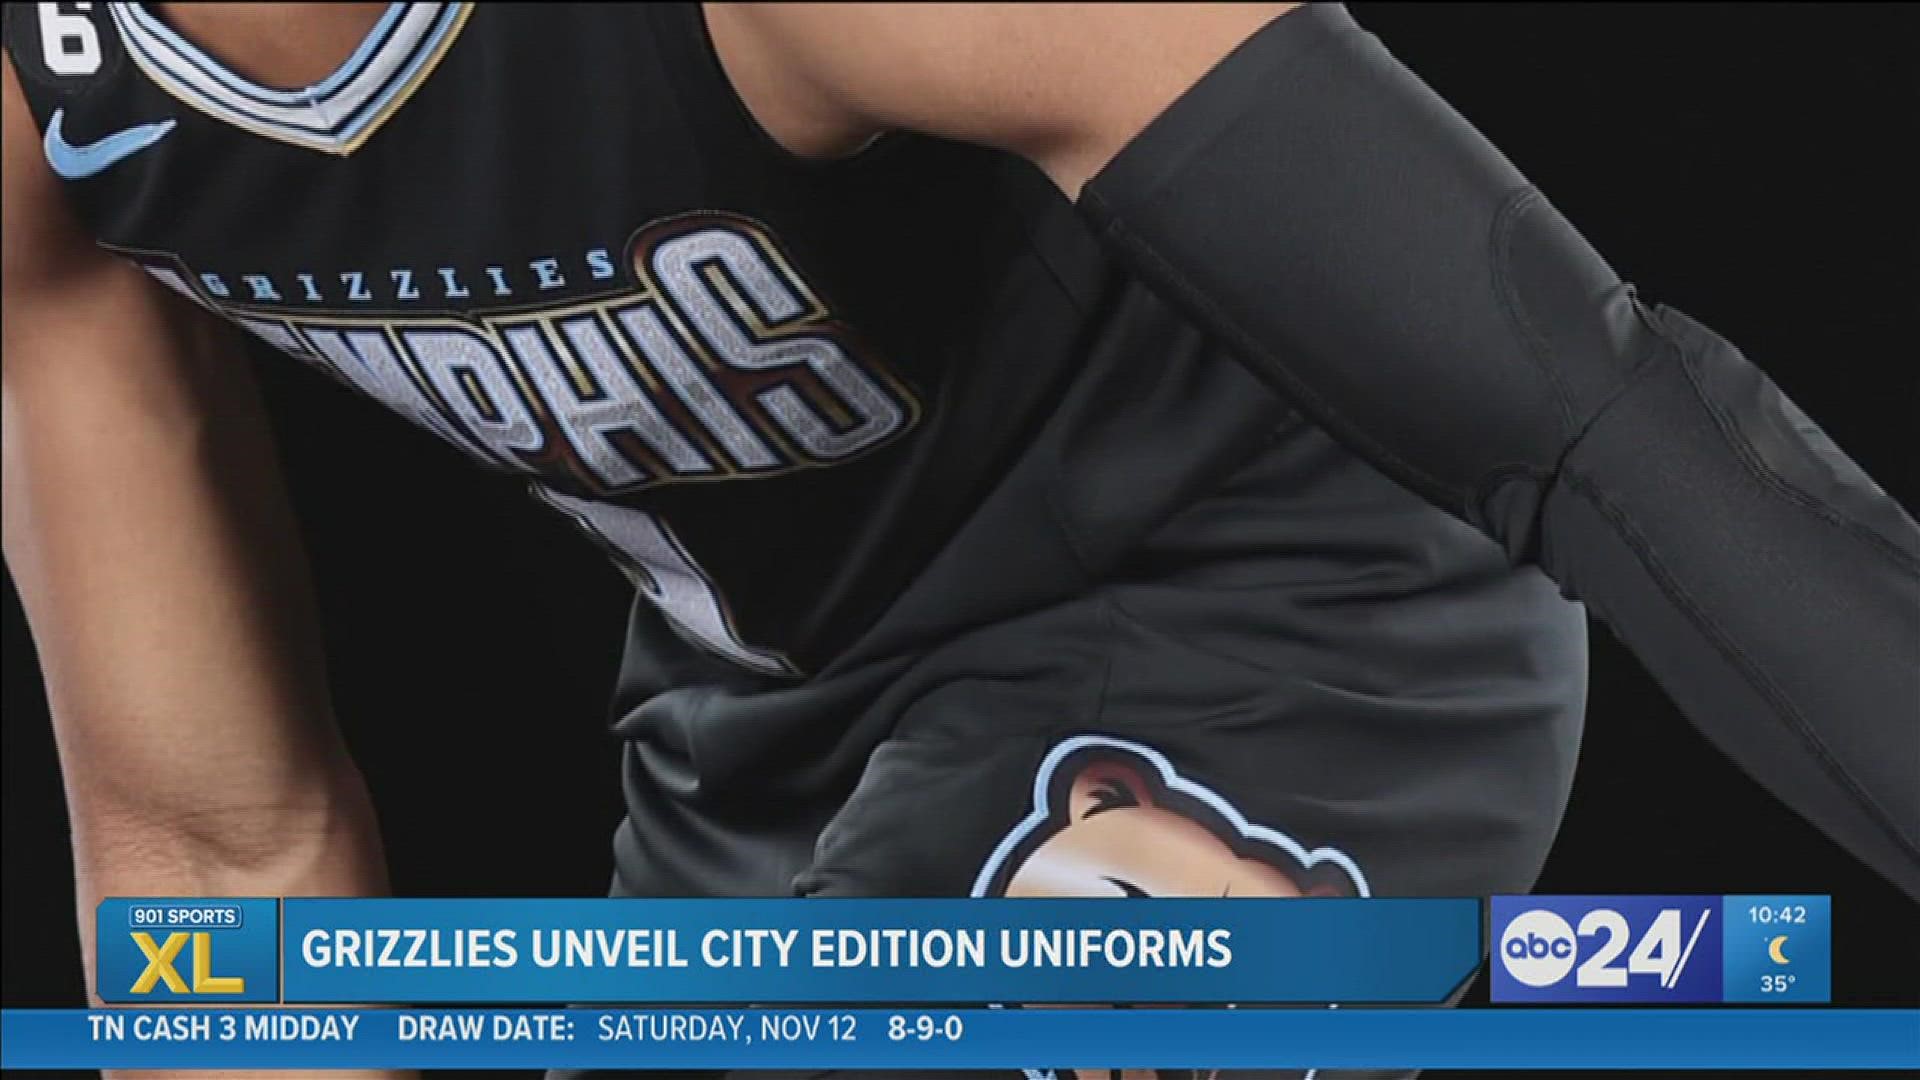 Take a look at the new City Edition uniforms